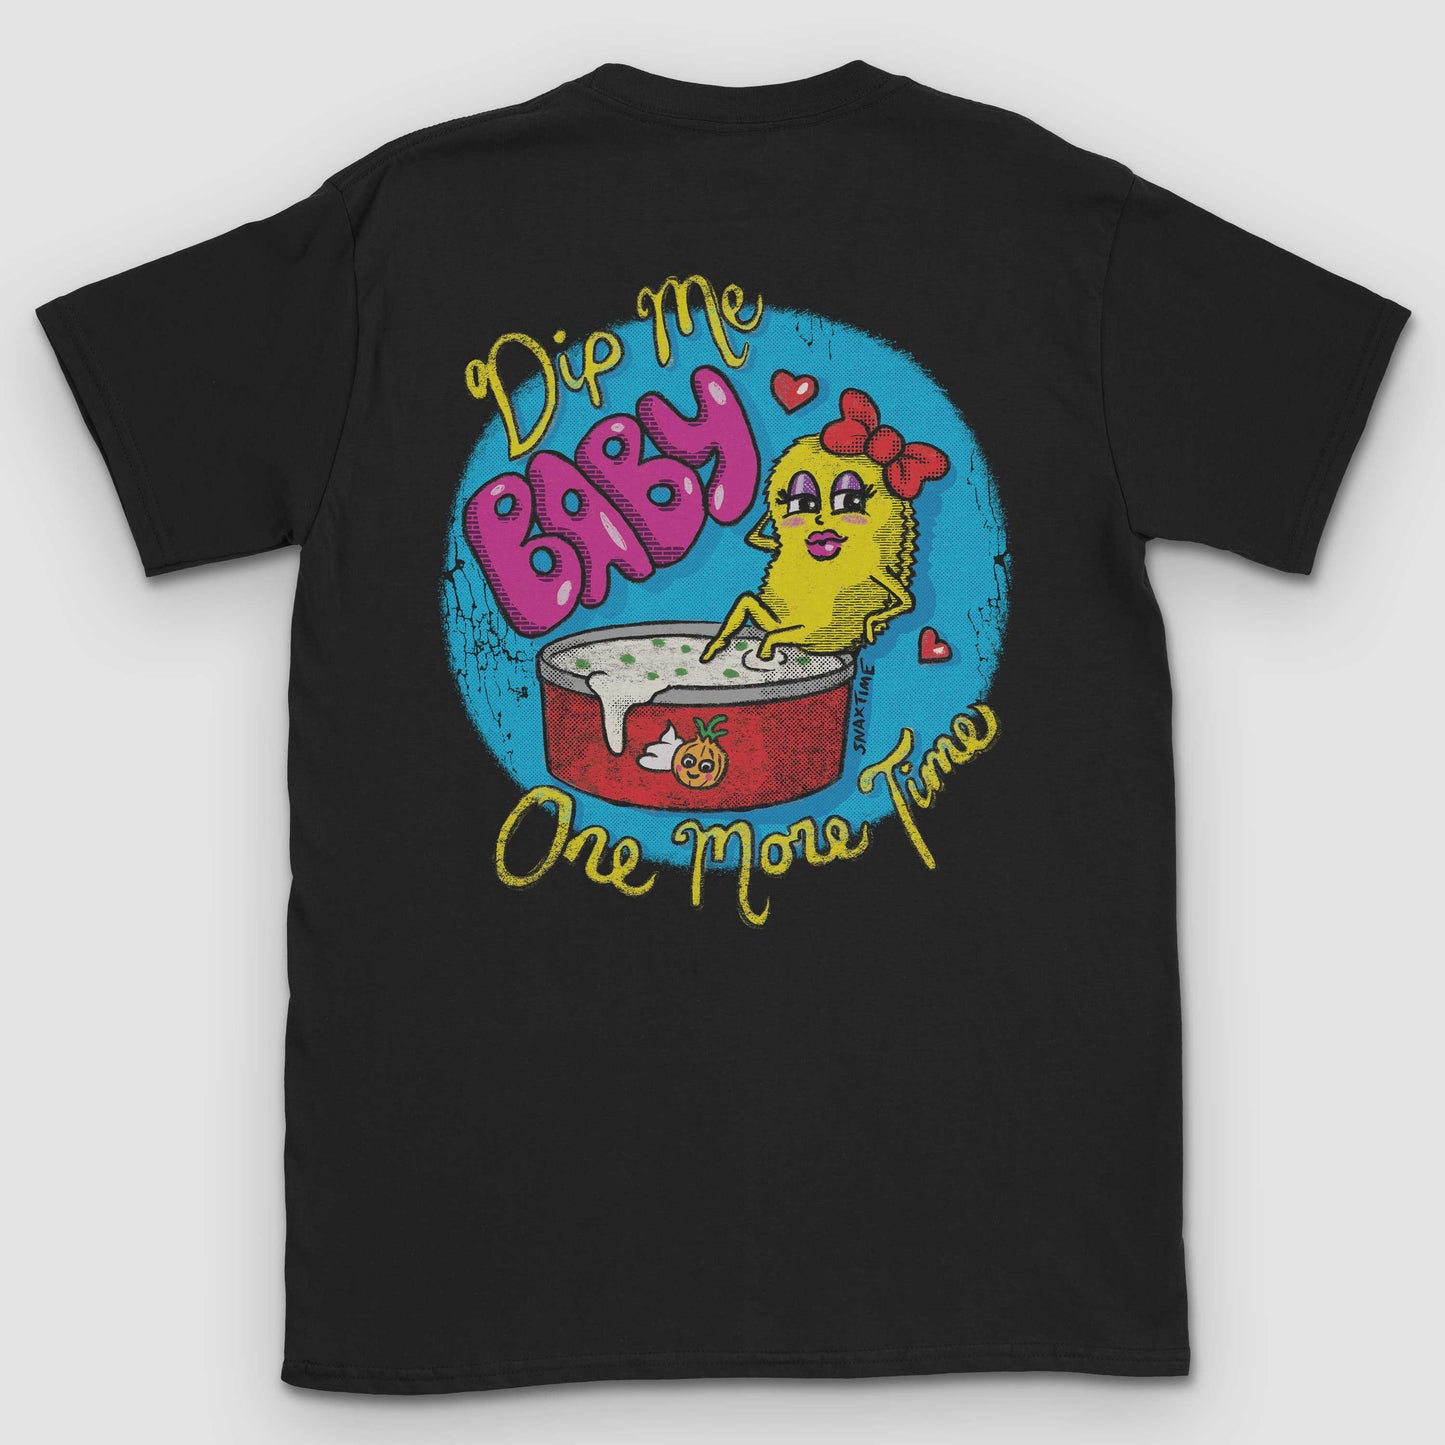 Cartoon "Dip Me Baby One More Time" Graphic T-Shirt - Snaxtime Retro Style Food Apparel